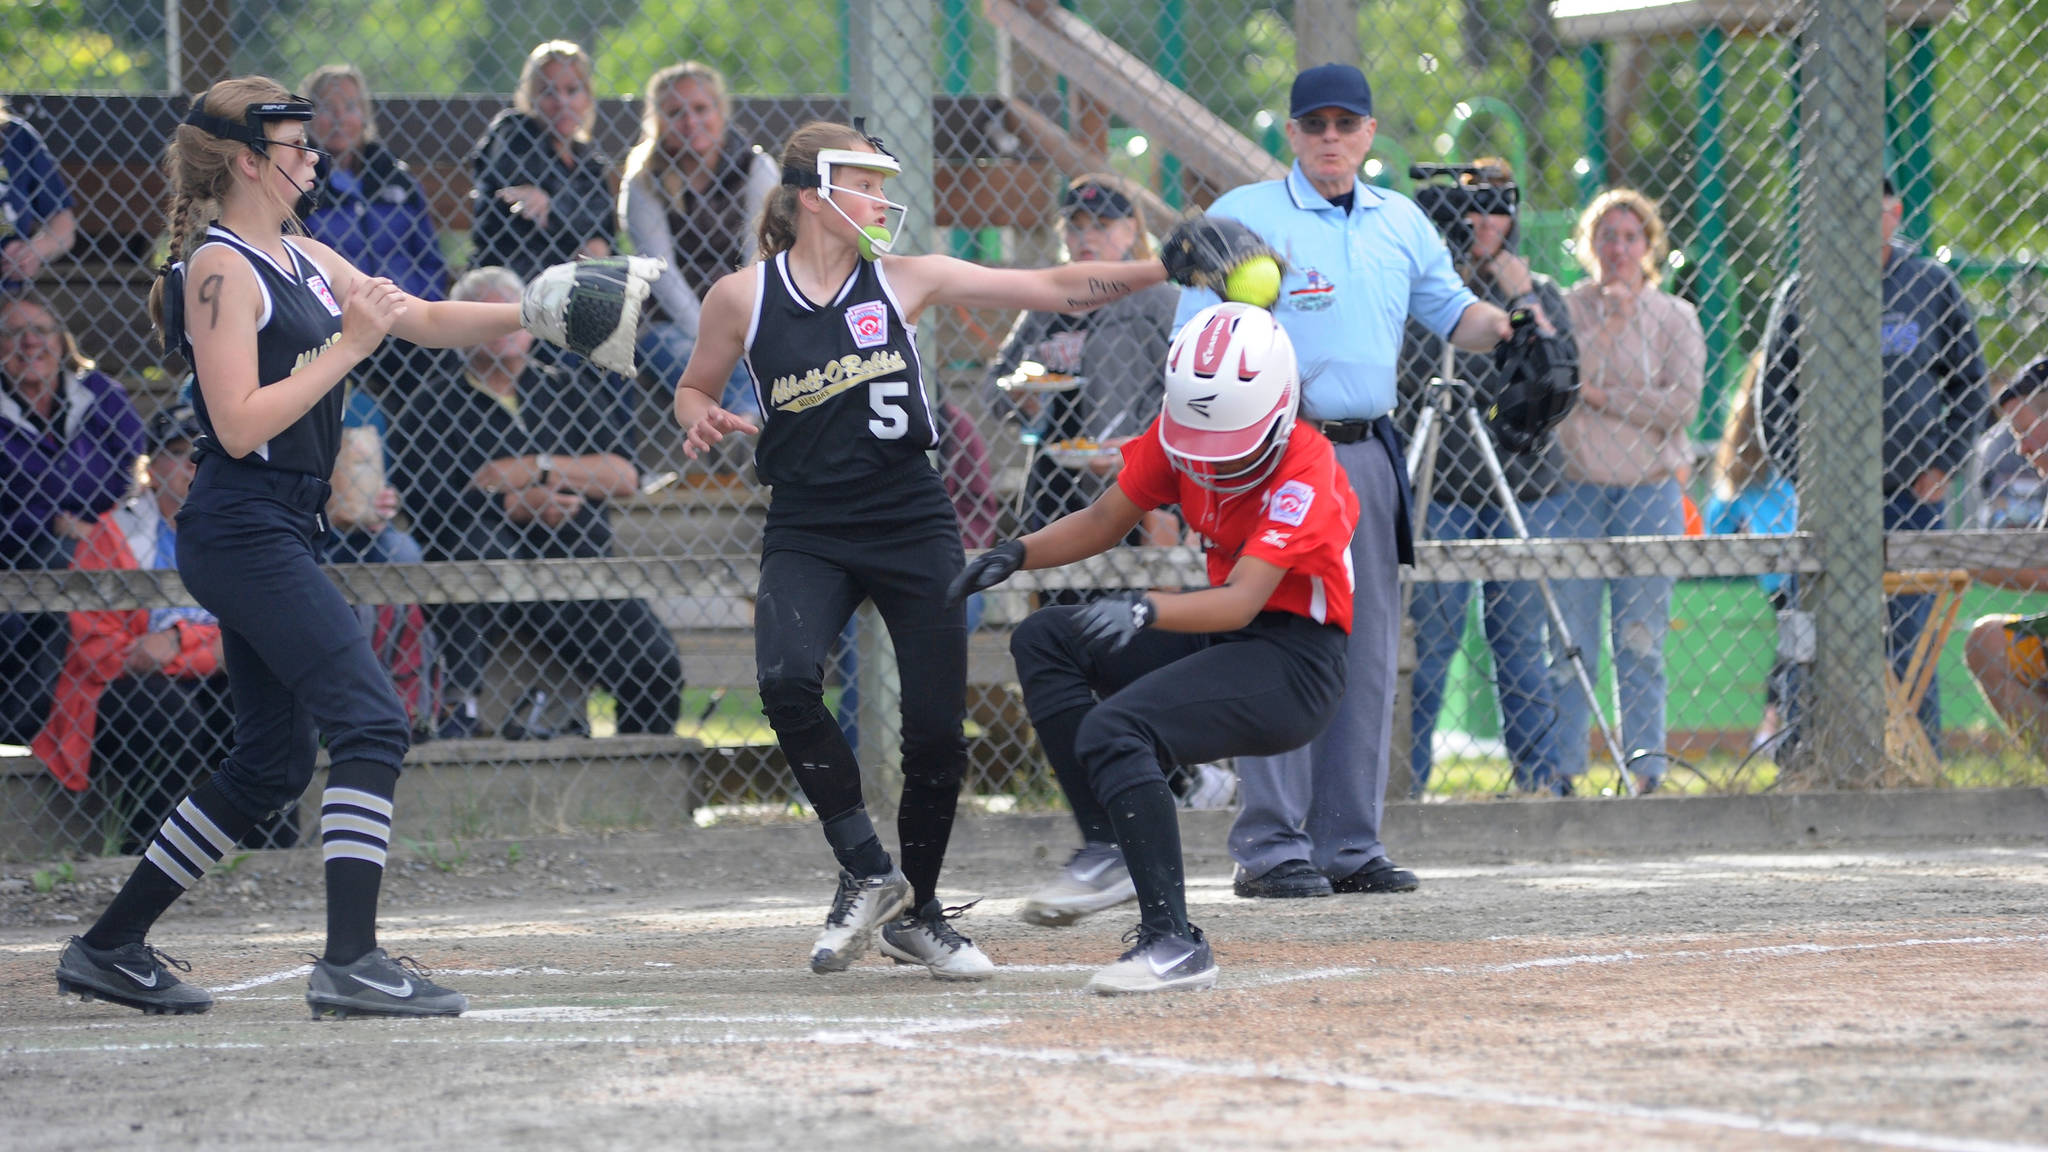 Gastineau Channel Little League’s Remi Starks steals home under the glove of Abbott-O-Rabbit Little League’s Alexis Moore in the top of the fourth inning of the Alaska Major Softball State Championships at Melvin Park on Thursday. GCLL (Juneau) won 16-13. (Nolin Ainsworth | Juneau Empire)